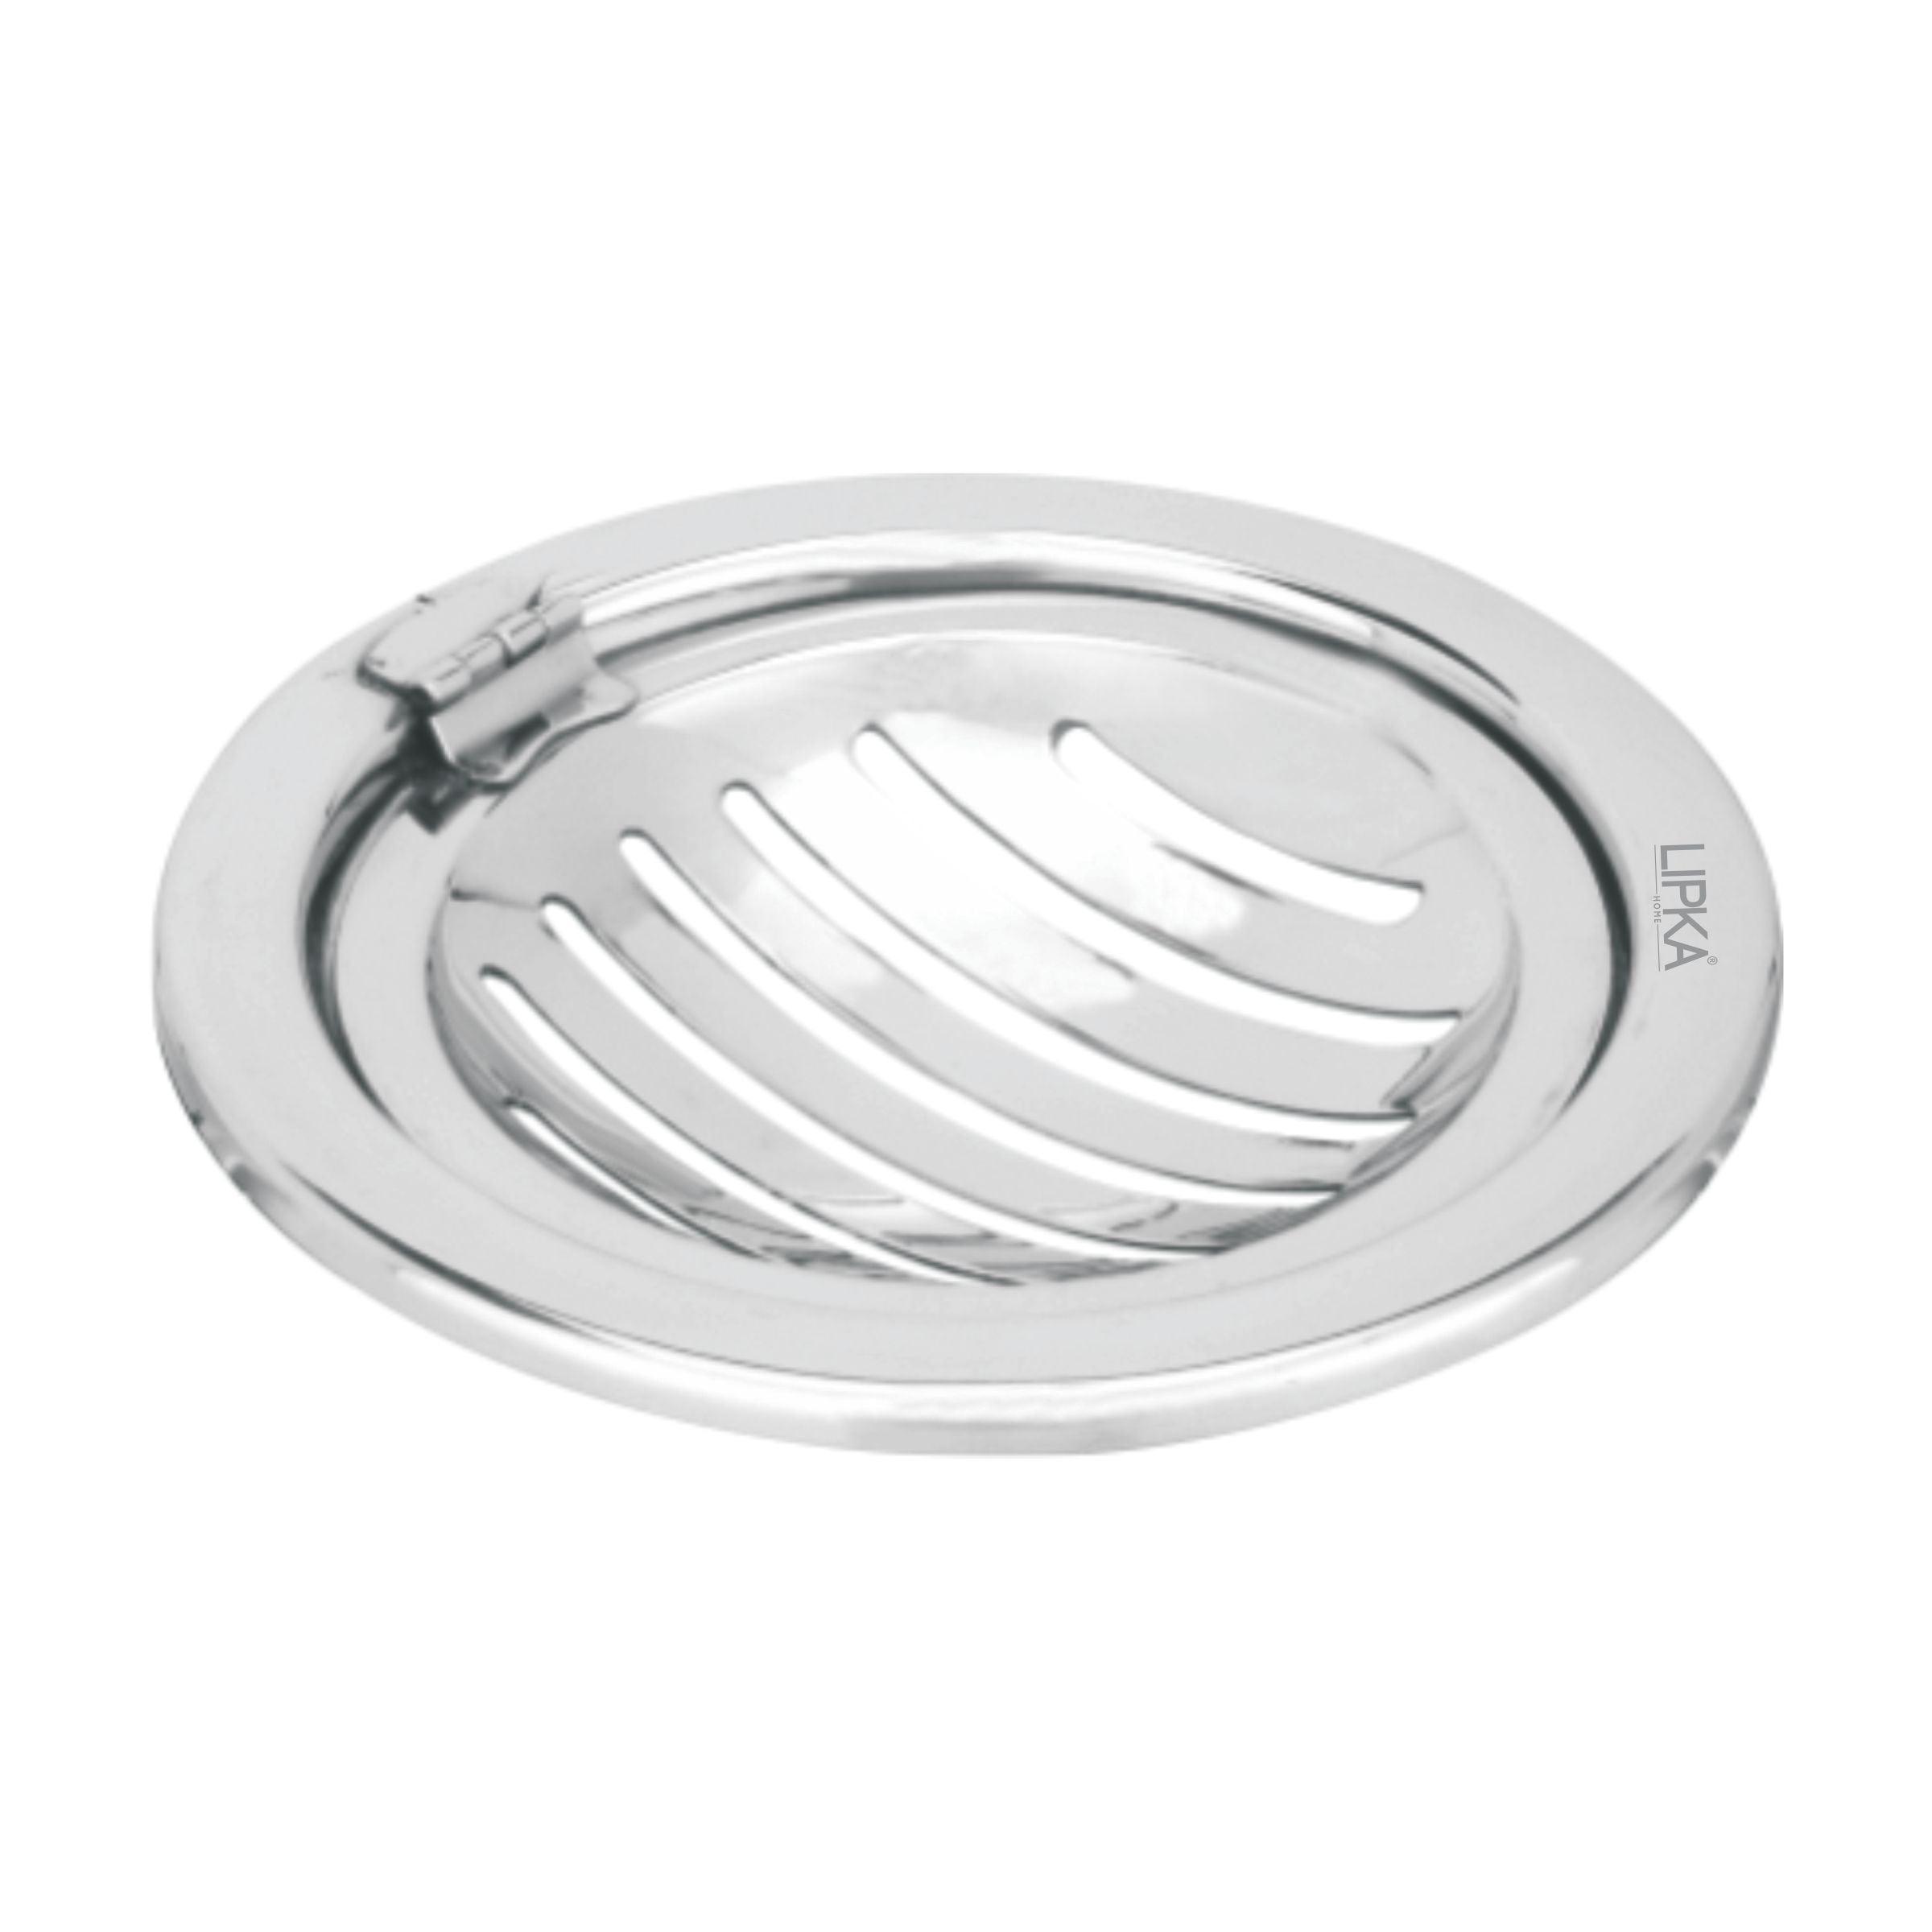 Eon Round Floor Drain with Classic Jali and Hinge (5 inches)